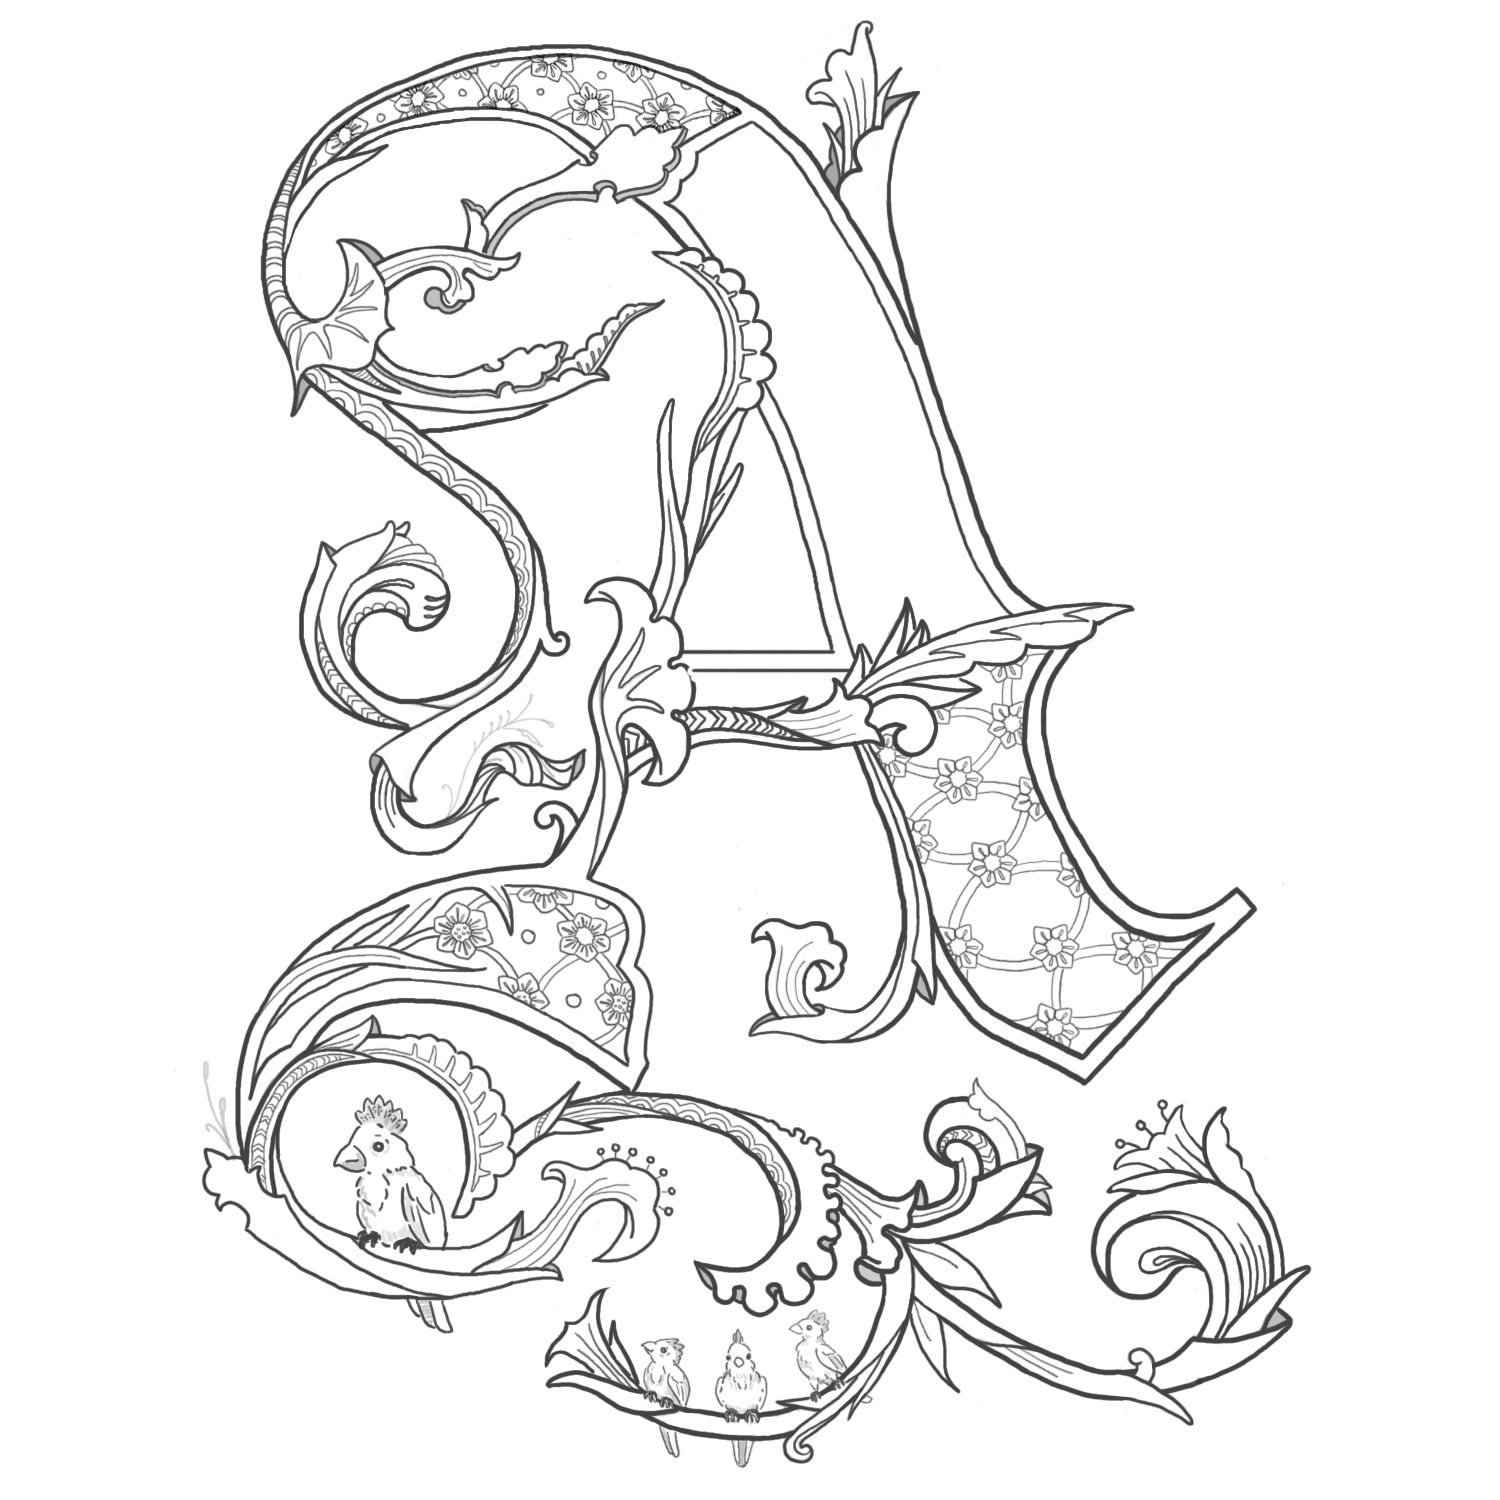 Illuminated Alphabet Coloring Pages Coloring Pages Excelent Illuminated Lettersg Pages Image Ideas